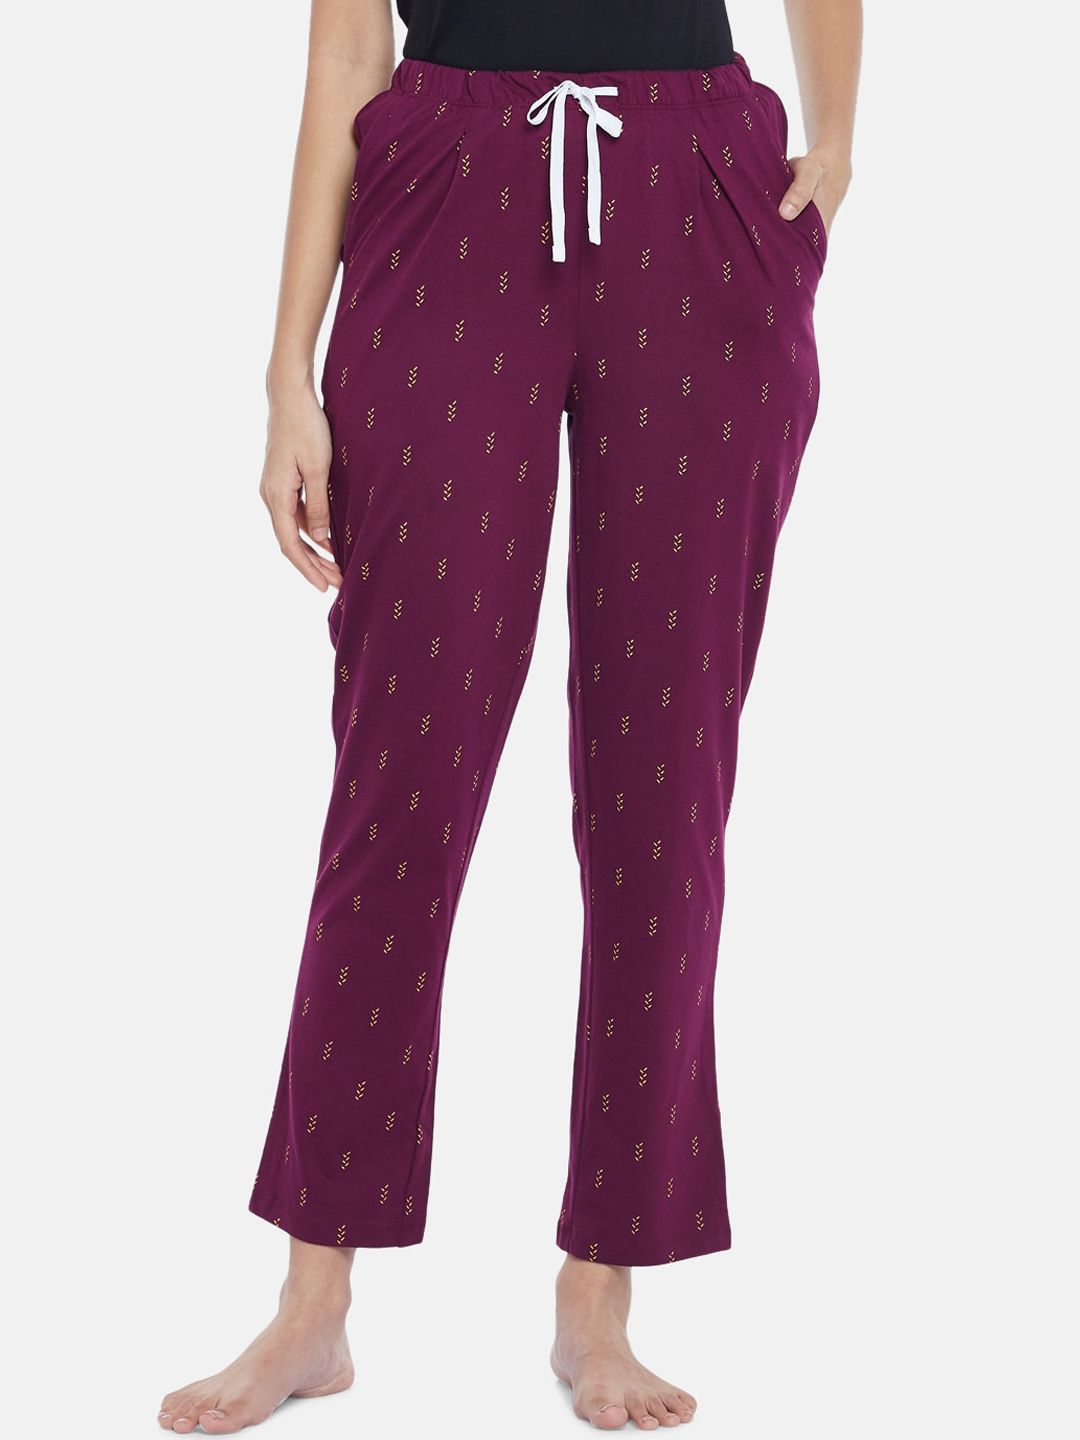 Dreamz by Pantaloons Women Maroon Cotton Printed Lounge Pants Price in India